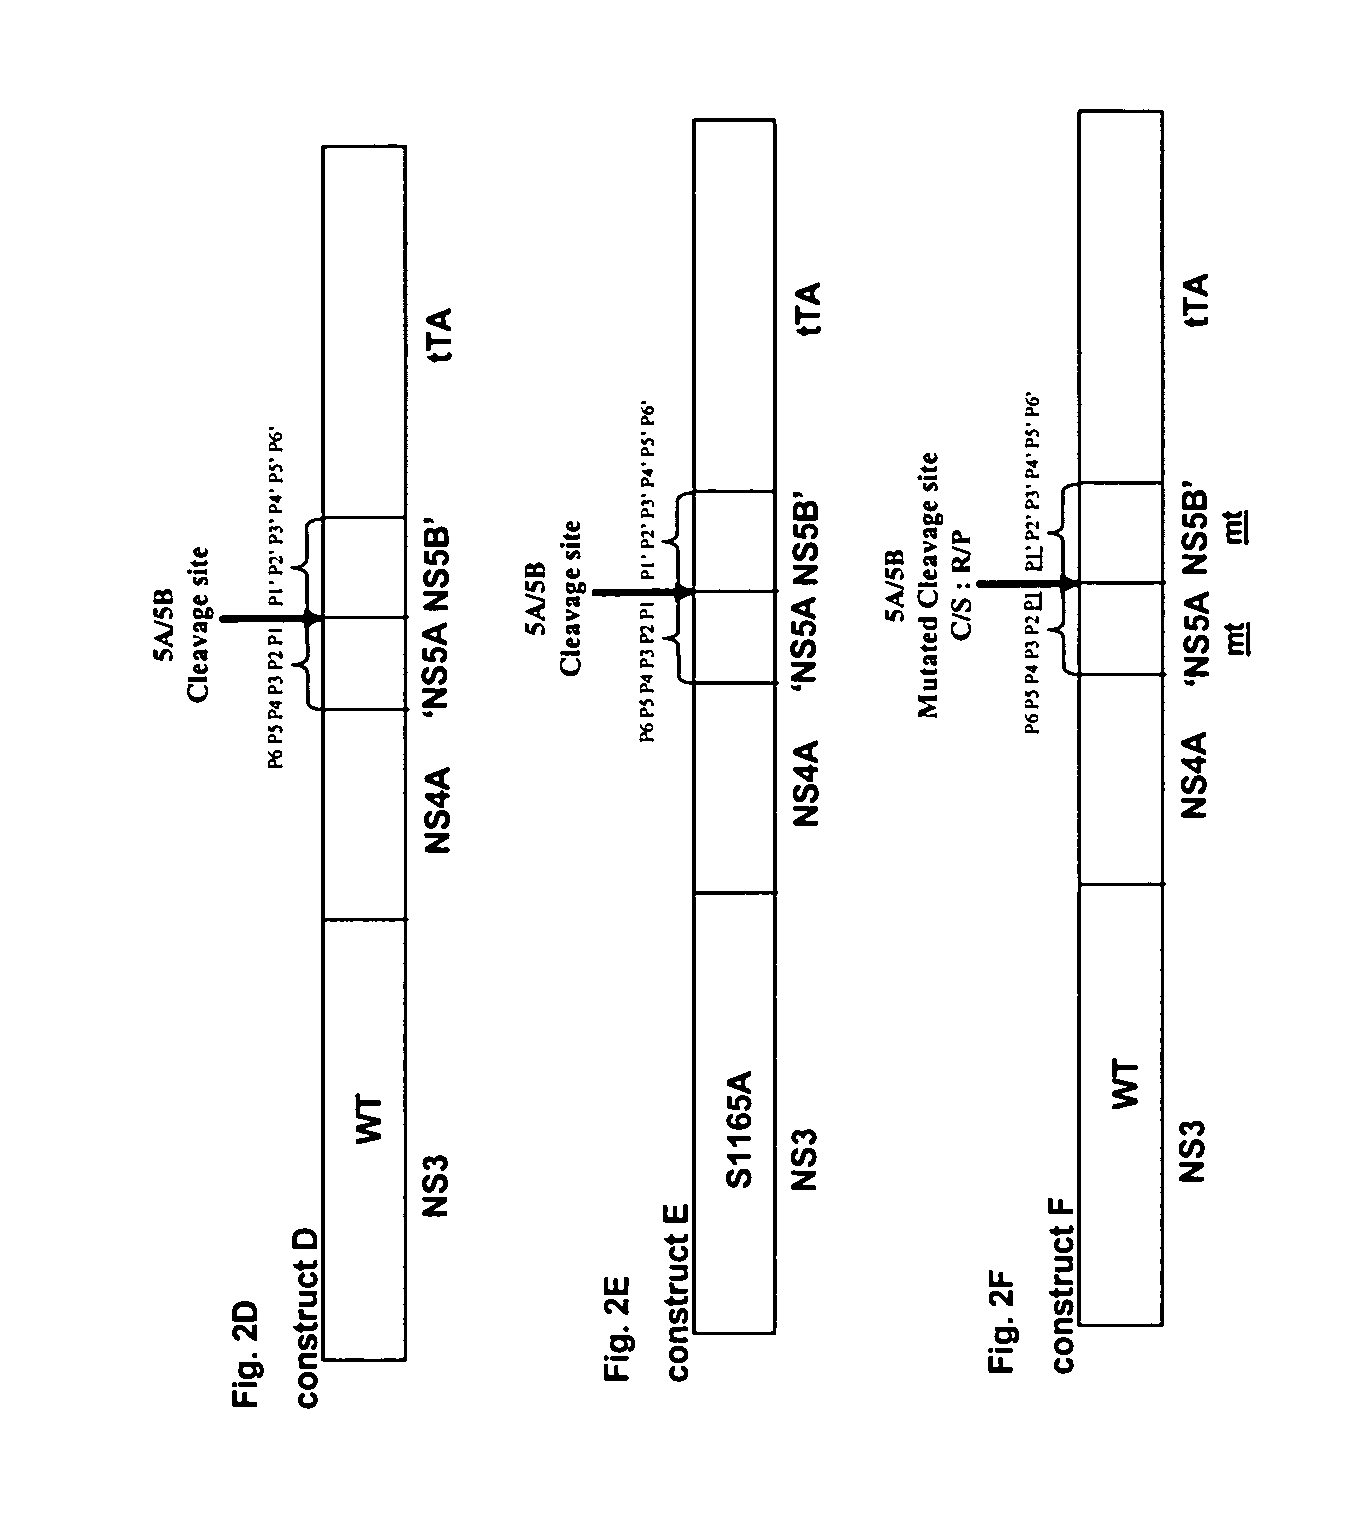 Surrogate cell-based system and method for assaying the activity of hepatitis C virus NS3 protease